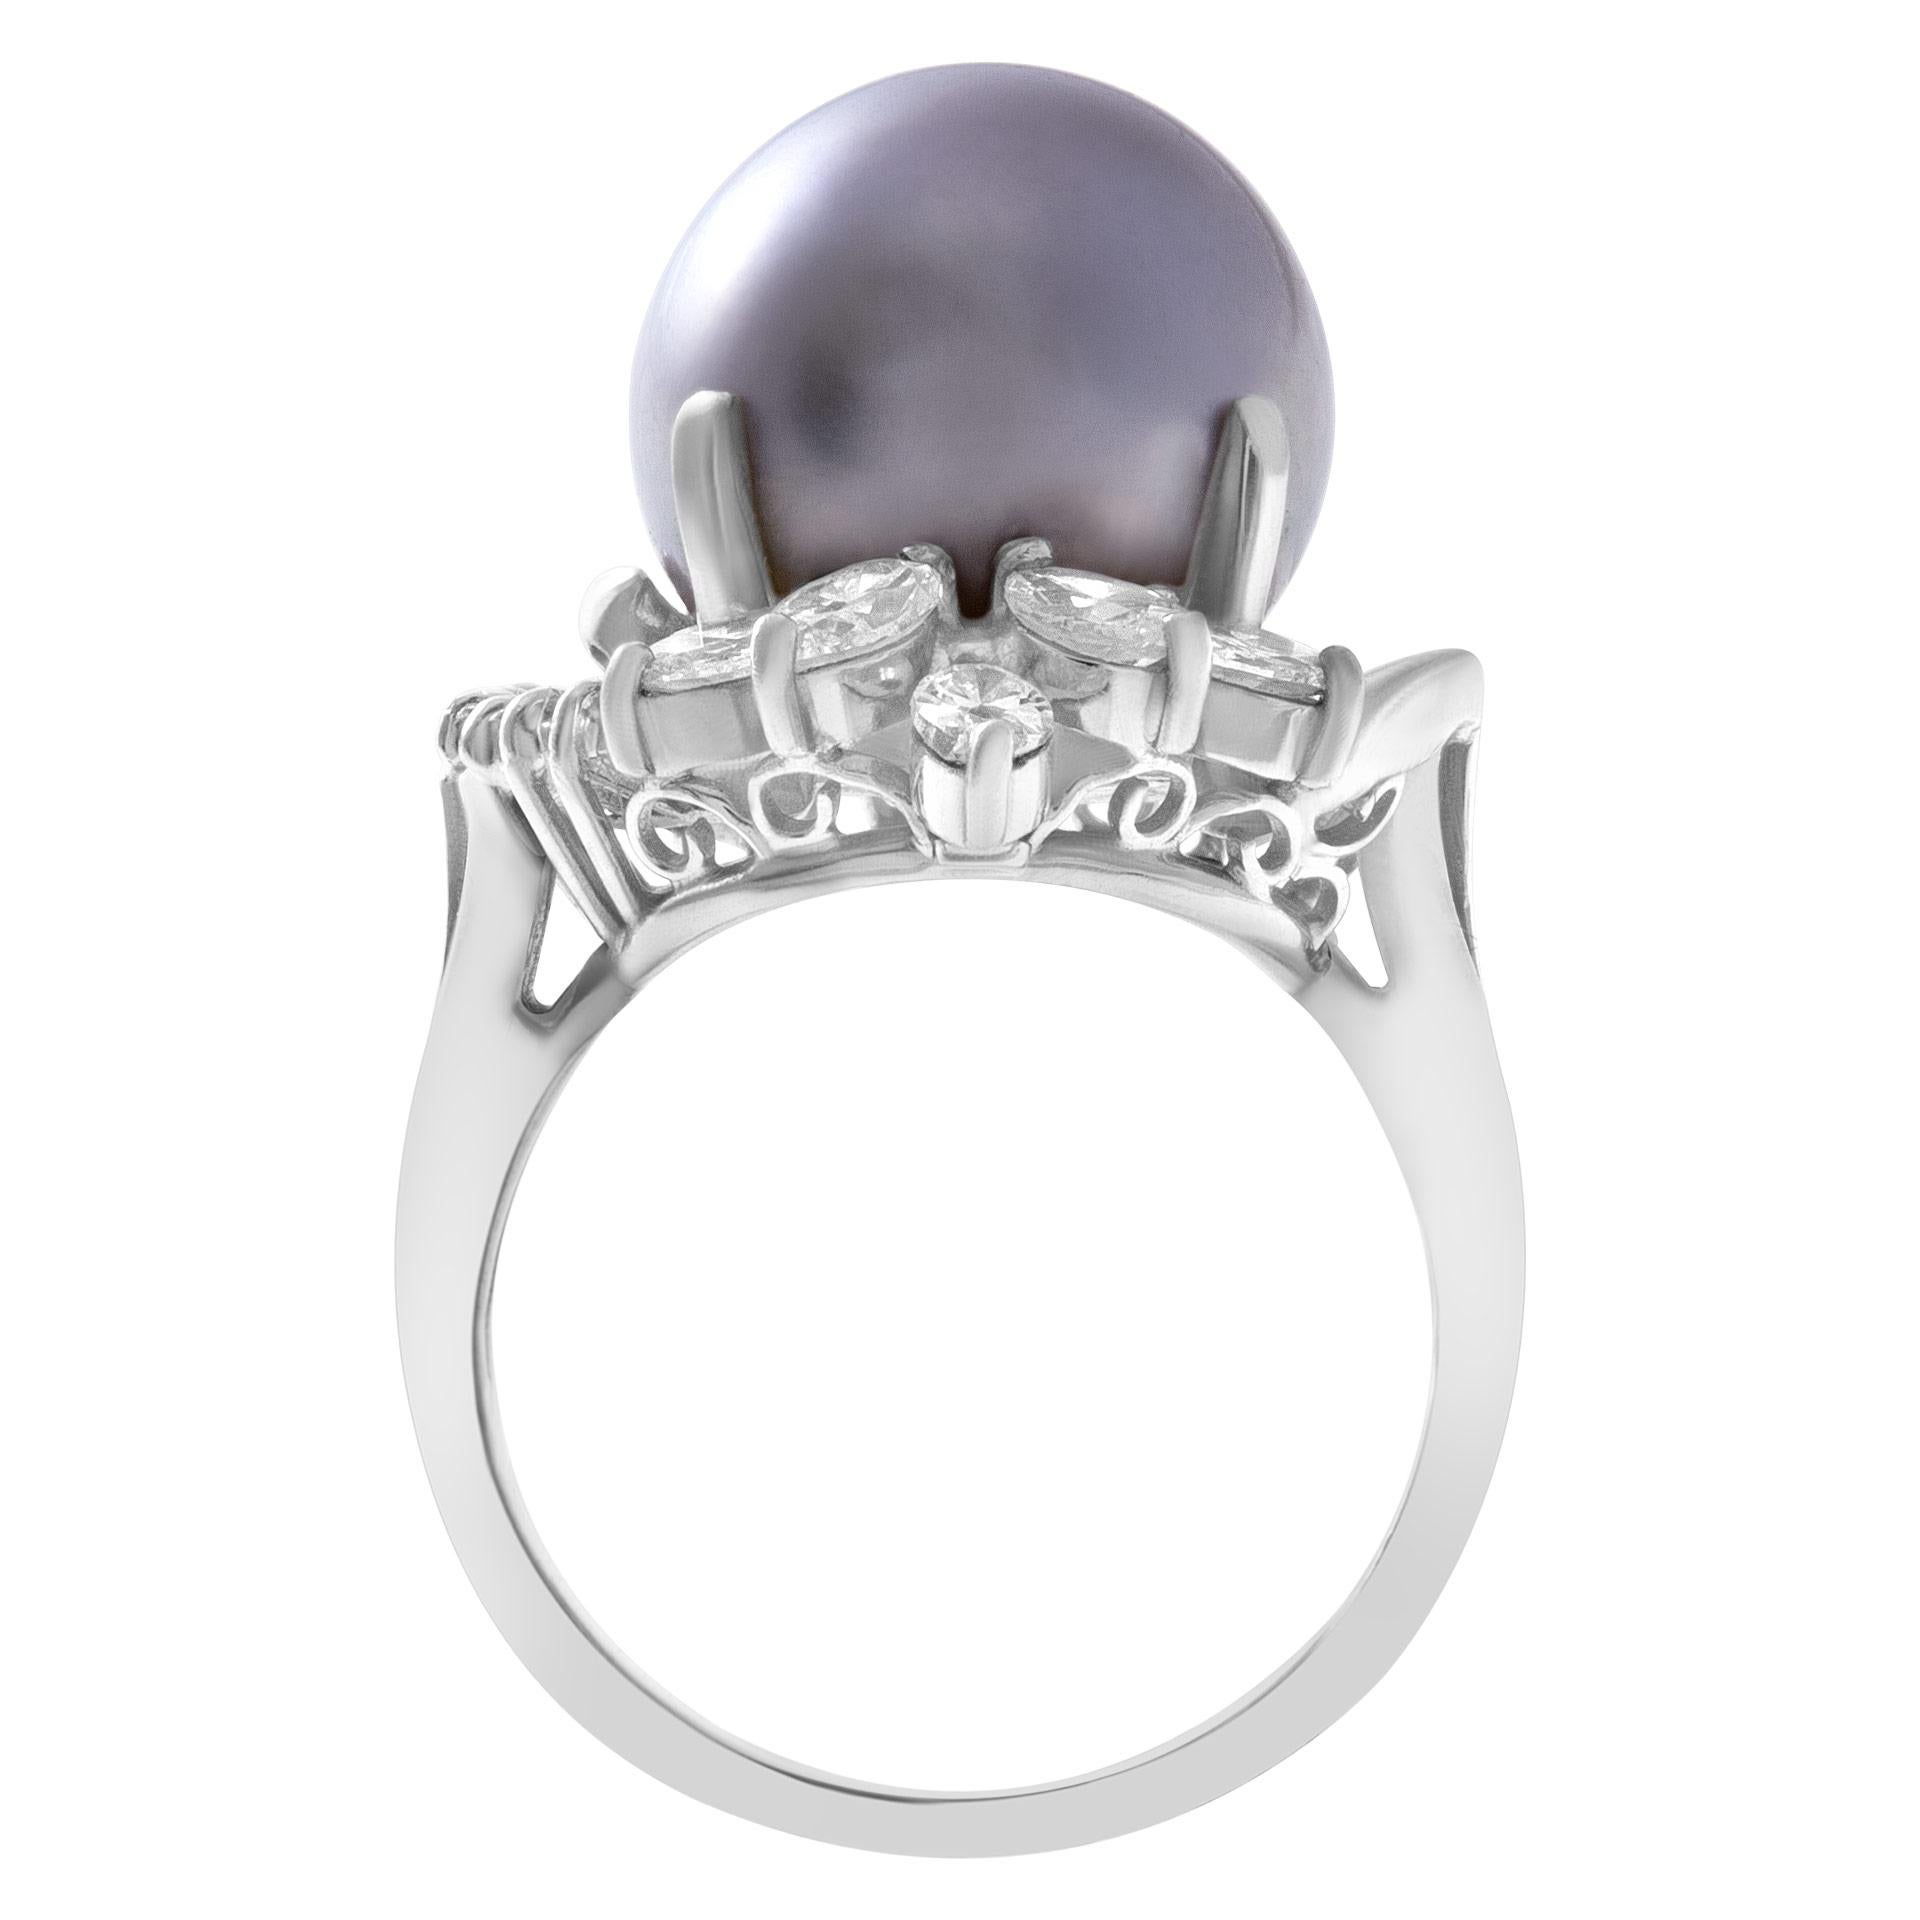 ESTIMATED RETAIL: $5,760 YOUR PRICE: $2,880 - Lustrous black Tahitian pearl ring in 18k white gold. 11mm central pearl surrounded by over 1.0 carats in marquise and baguette diamonds. The width on top: 22mm, width at shank: 3.0mm. Size 7.

